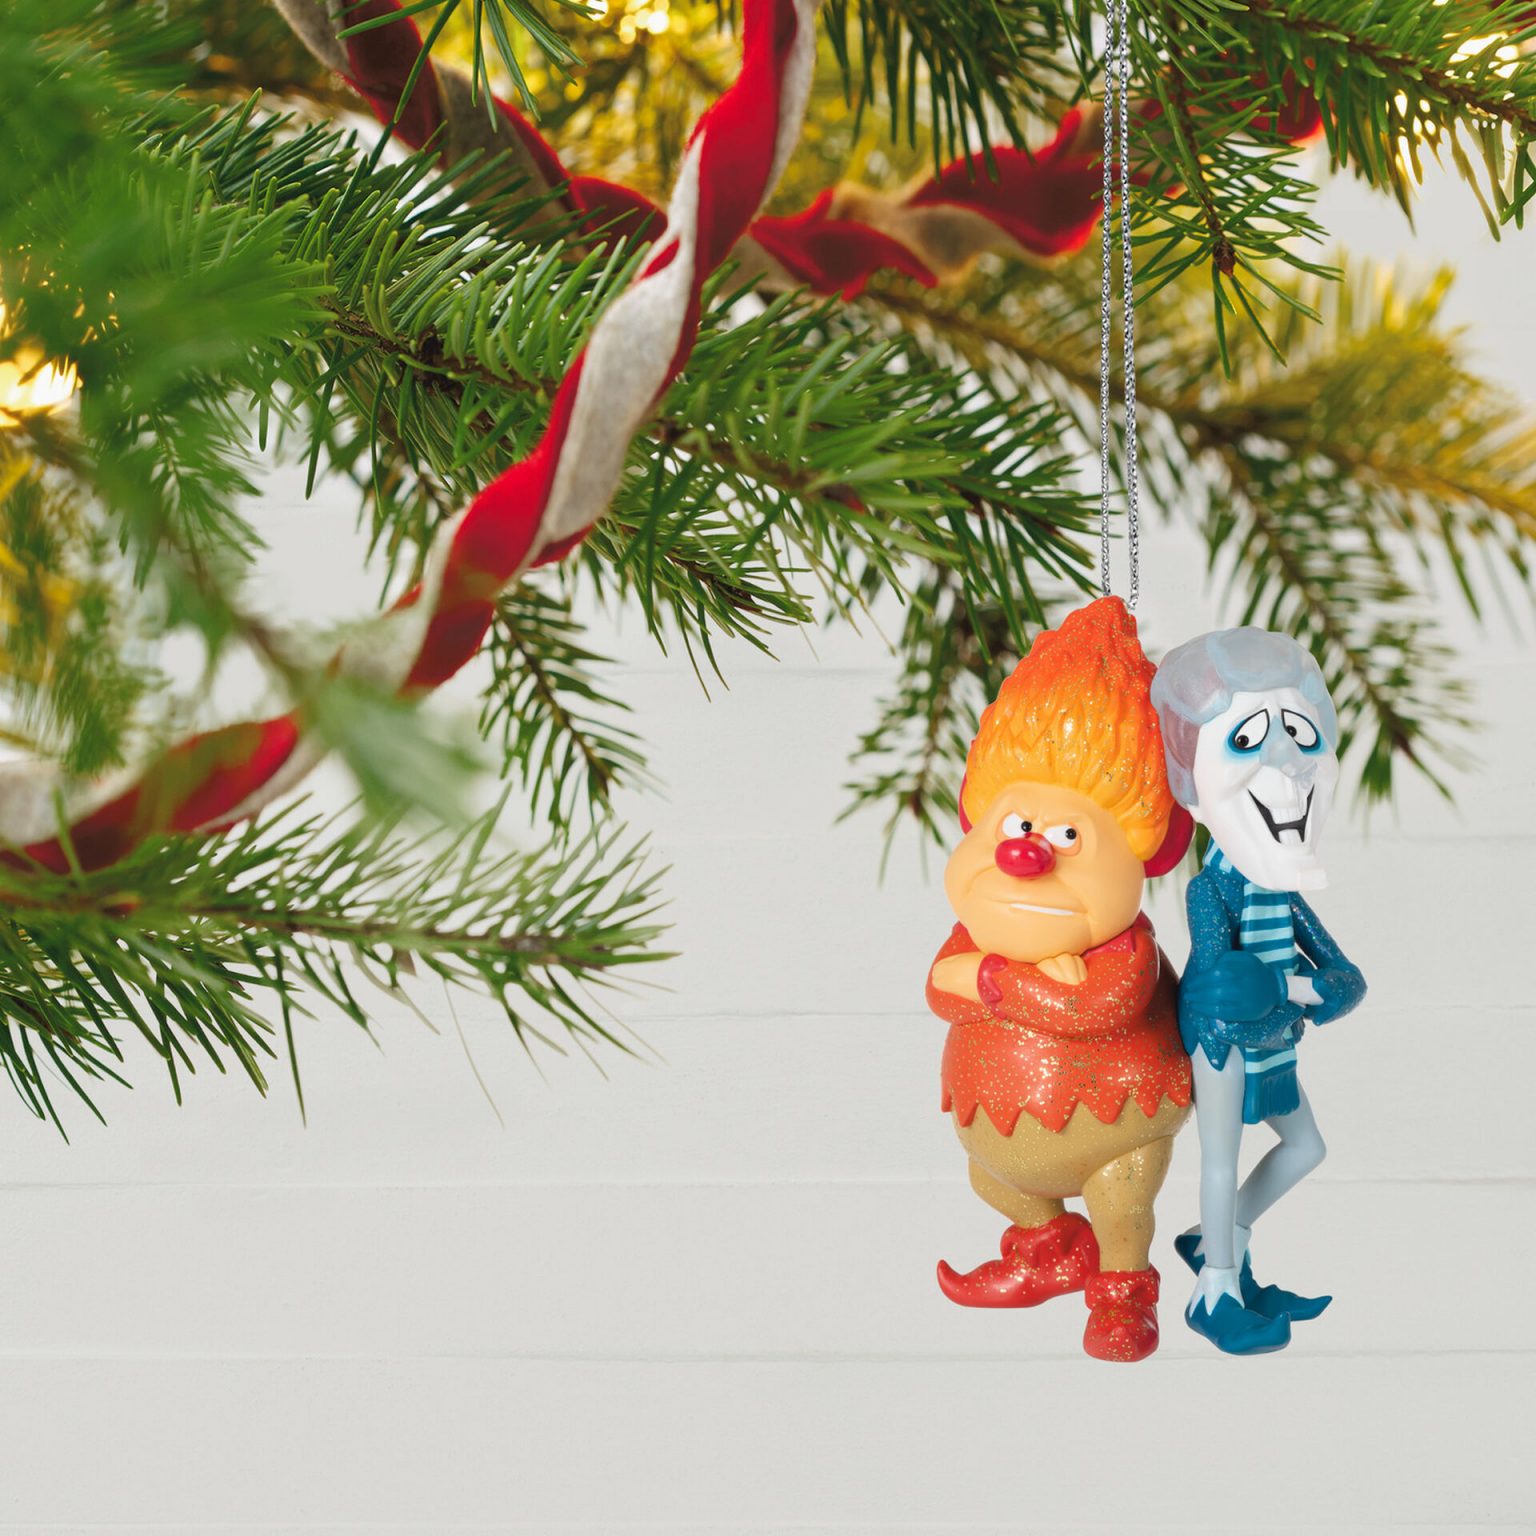 The Year Without a Santa Claus™ Snow Miser and Heat Miser Ornament 2021